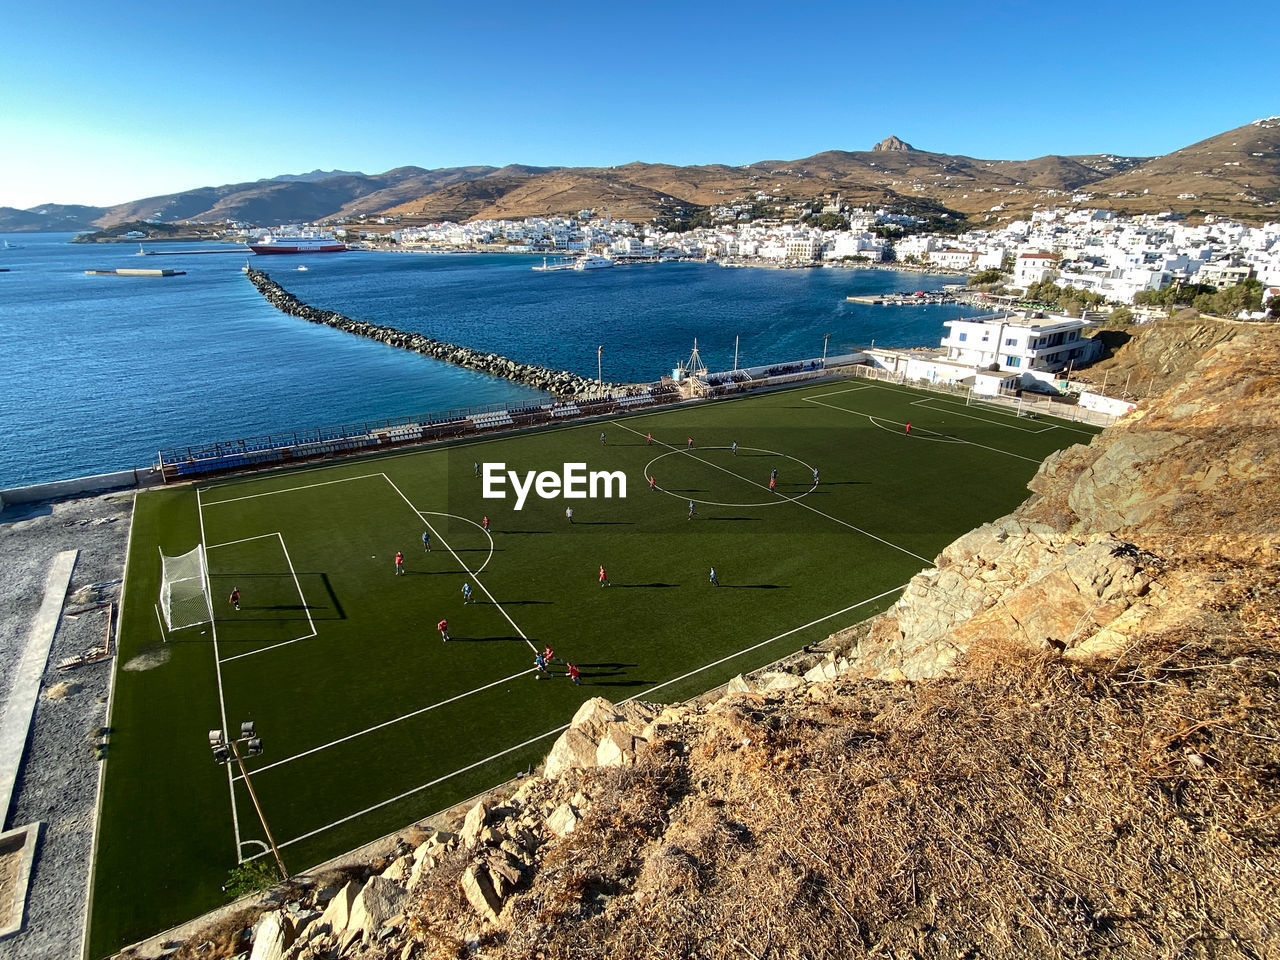 An aerial view of tinos football ground as a youth football match takes place, chora, tinos